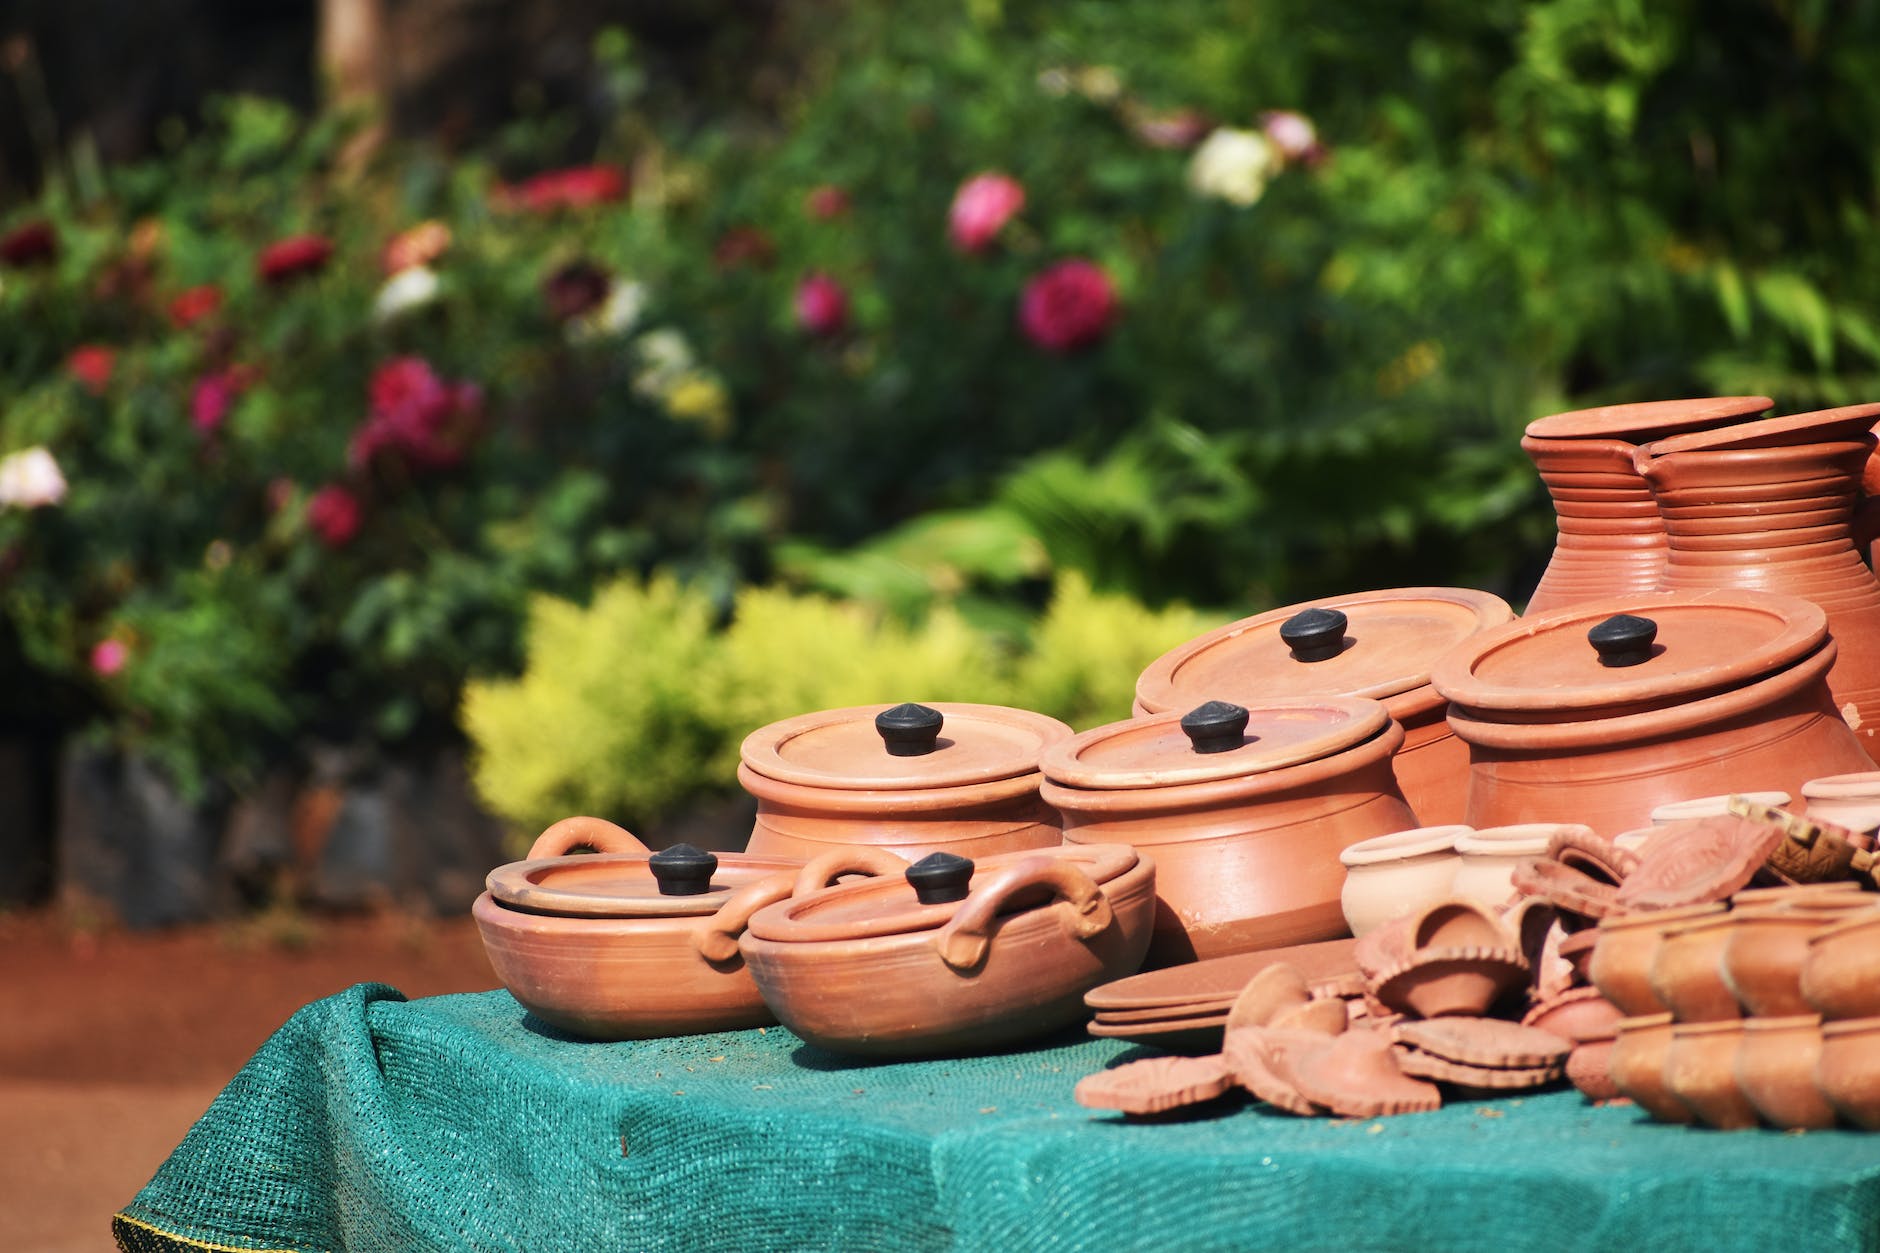 table full of clay pots bowls and plates